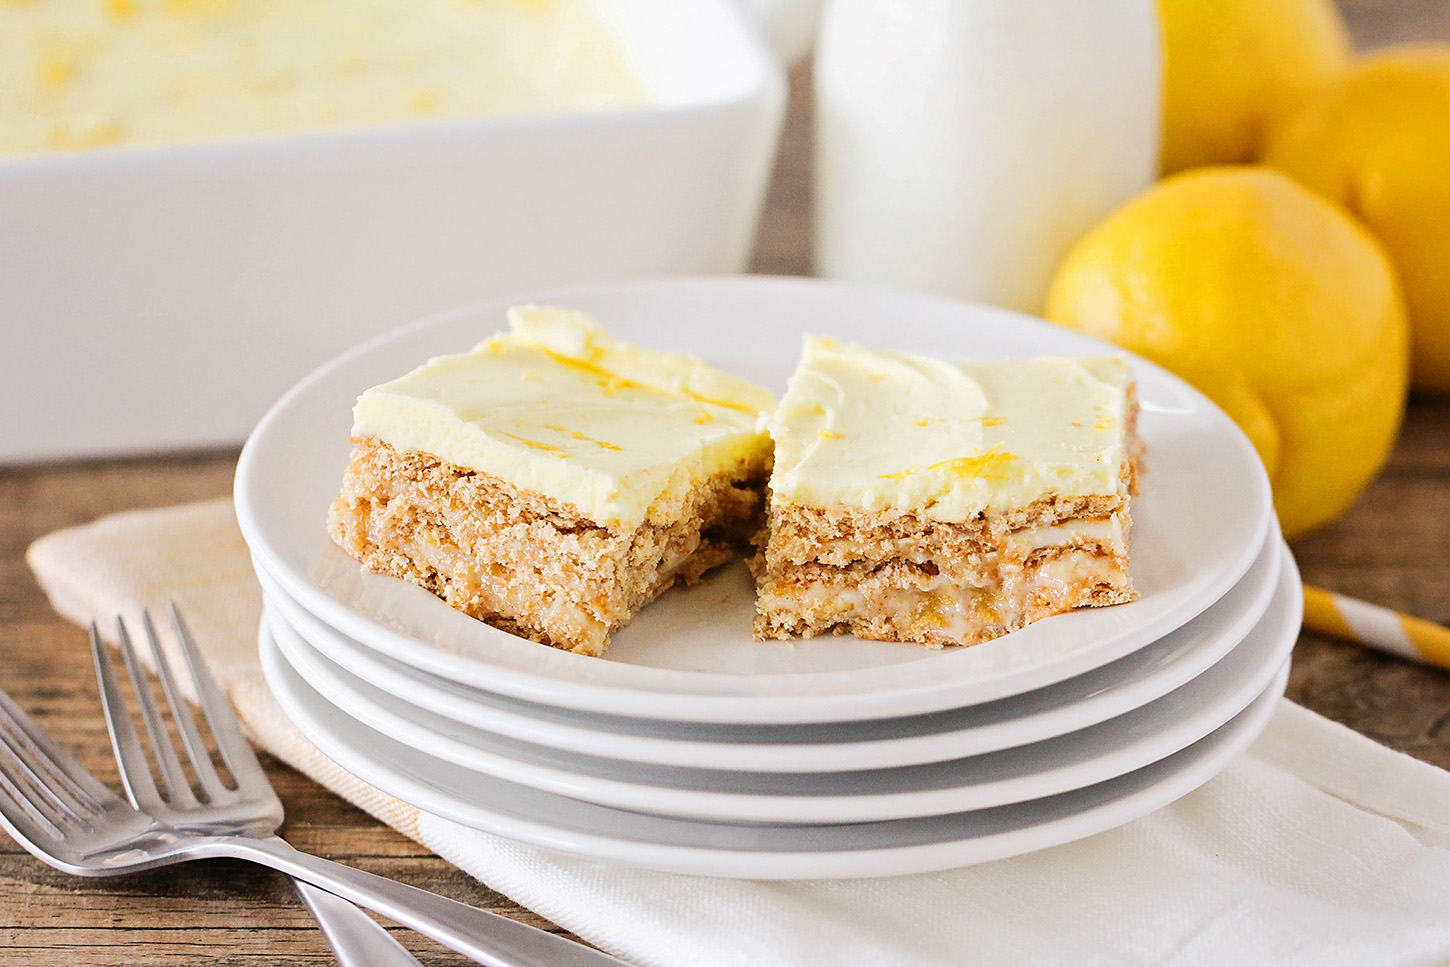 These delicious no-bake lemon squares taste like summer. They're the perfect combination of sweet and tart and don't require firing up the oven to make them!